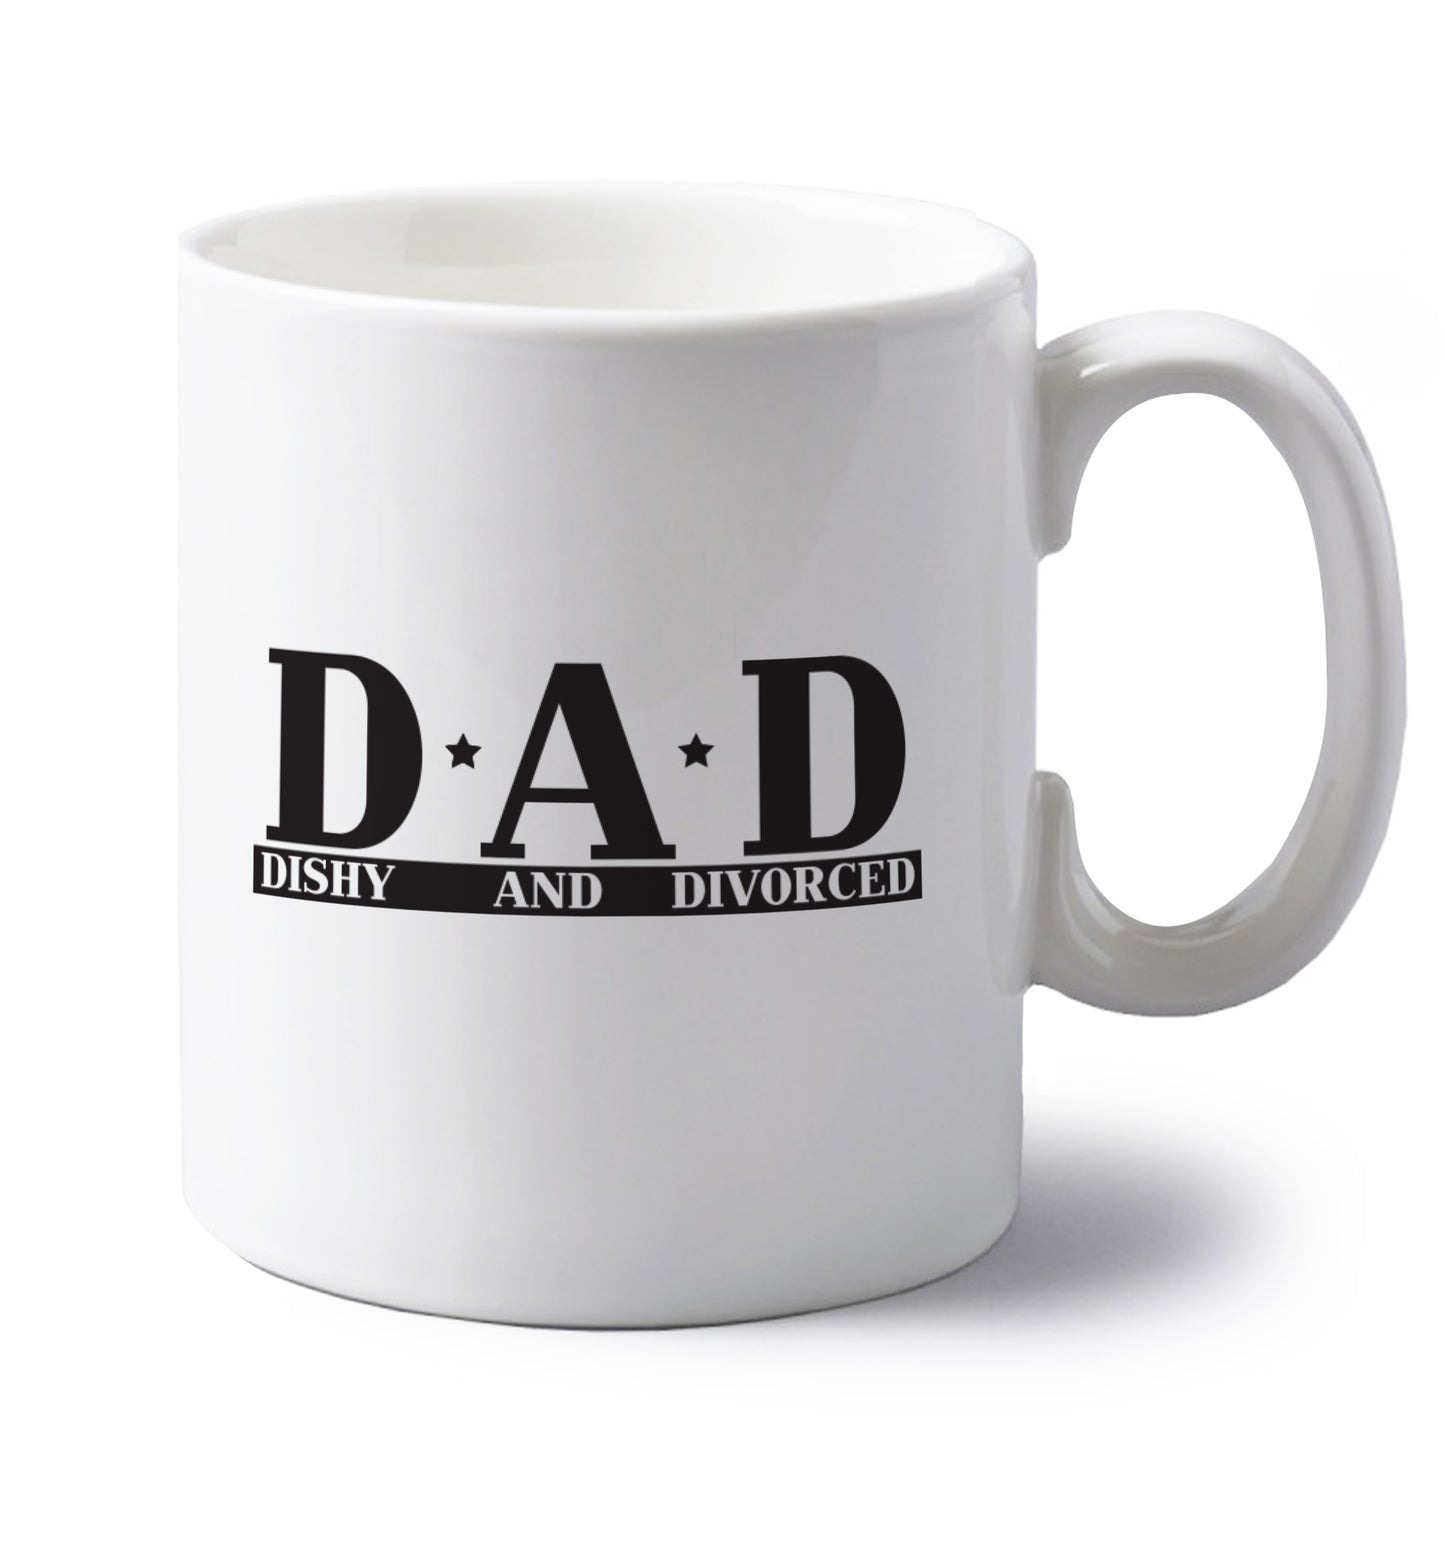 D.A.D meaning Dishy and Divorced left handed white ceramic mug 